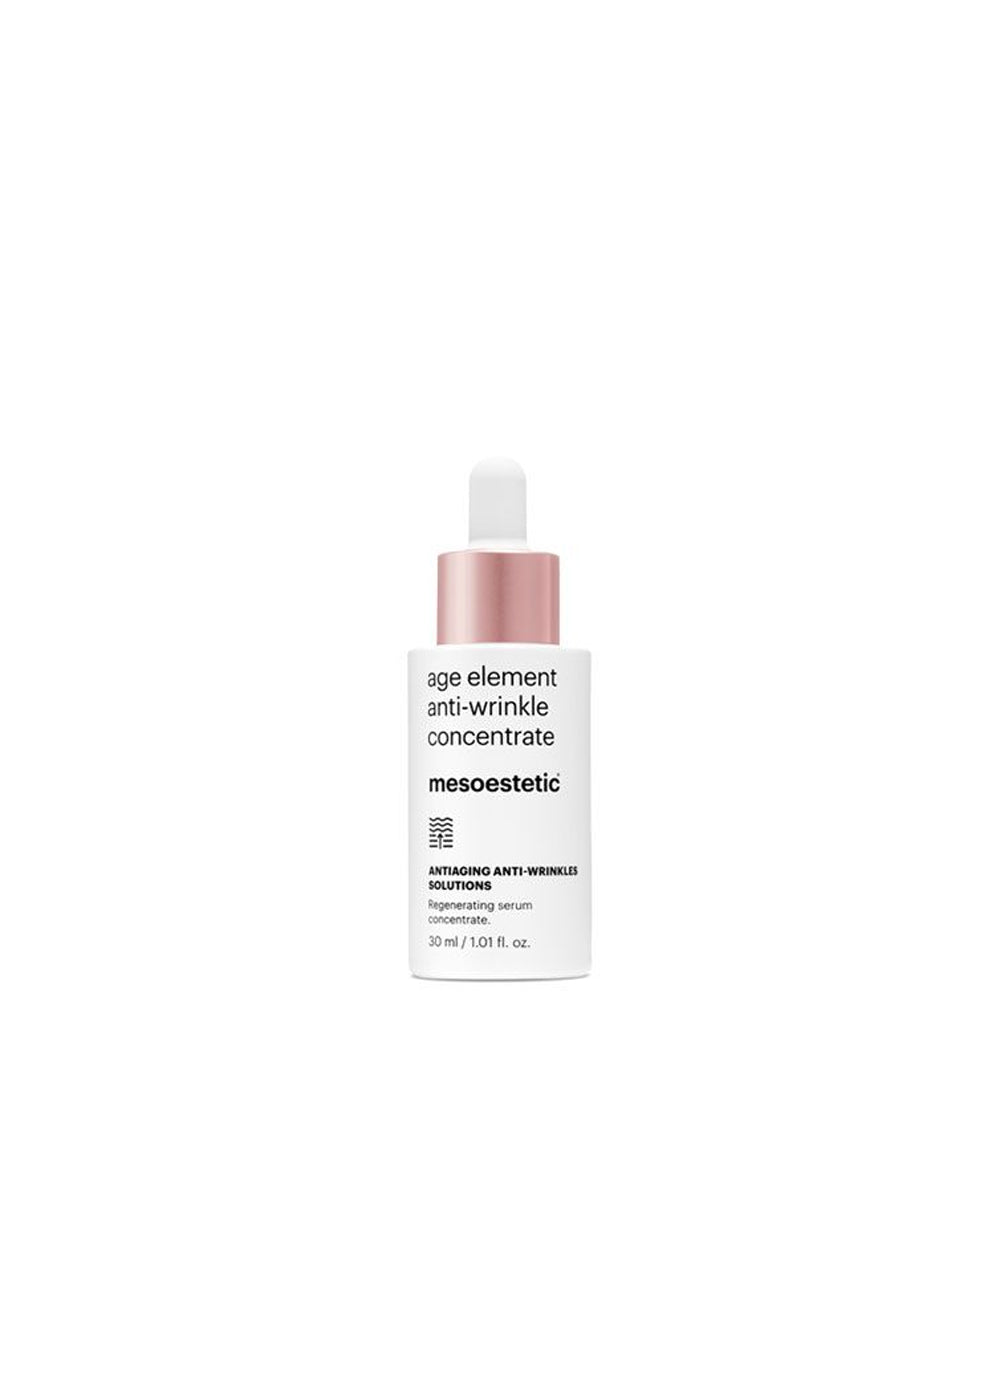 Mesoestetic age element® anti-wrinkle concentrate